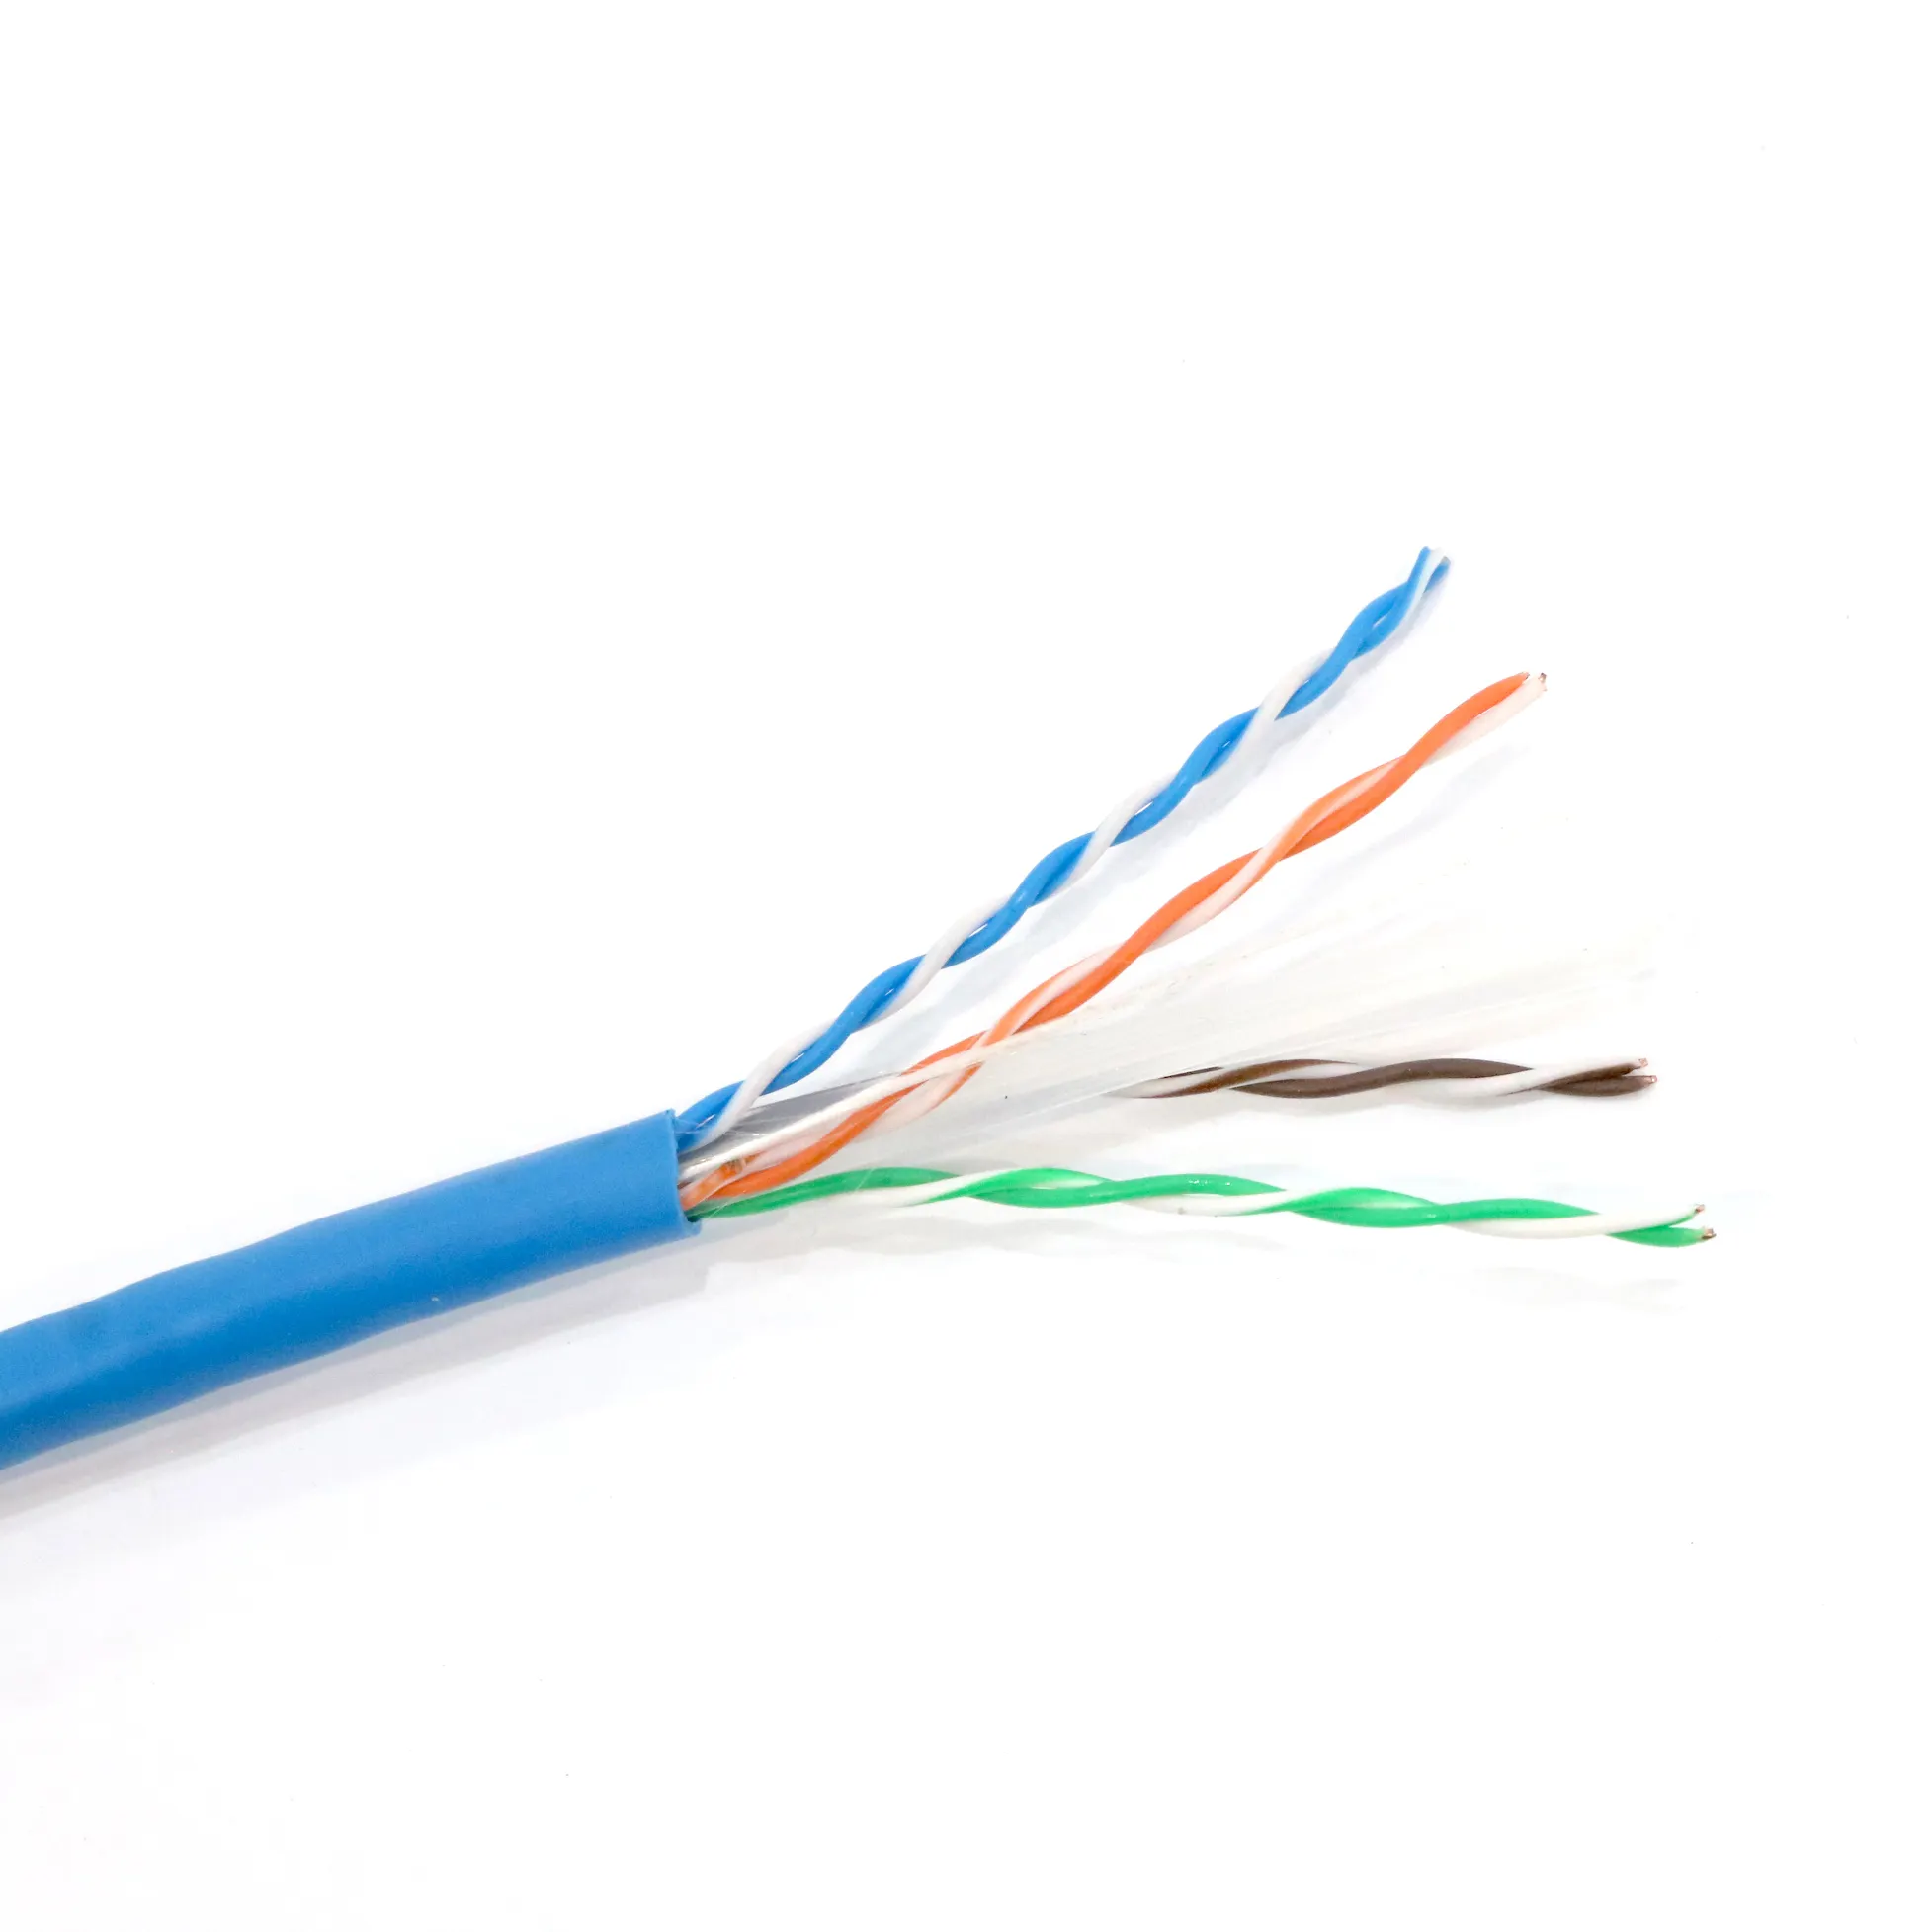 High quality Vietnam network cable with wholesale price CAT6 UTP 4 pairs 23AWG Copper through network cable tester